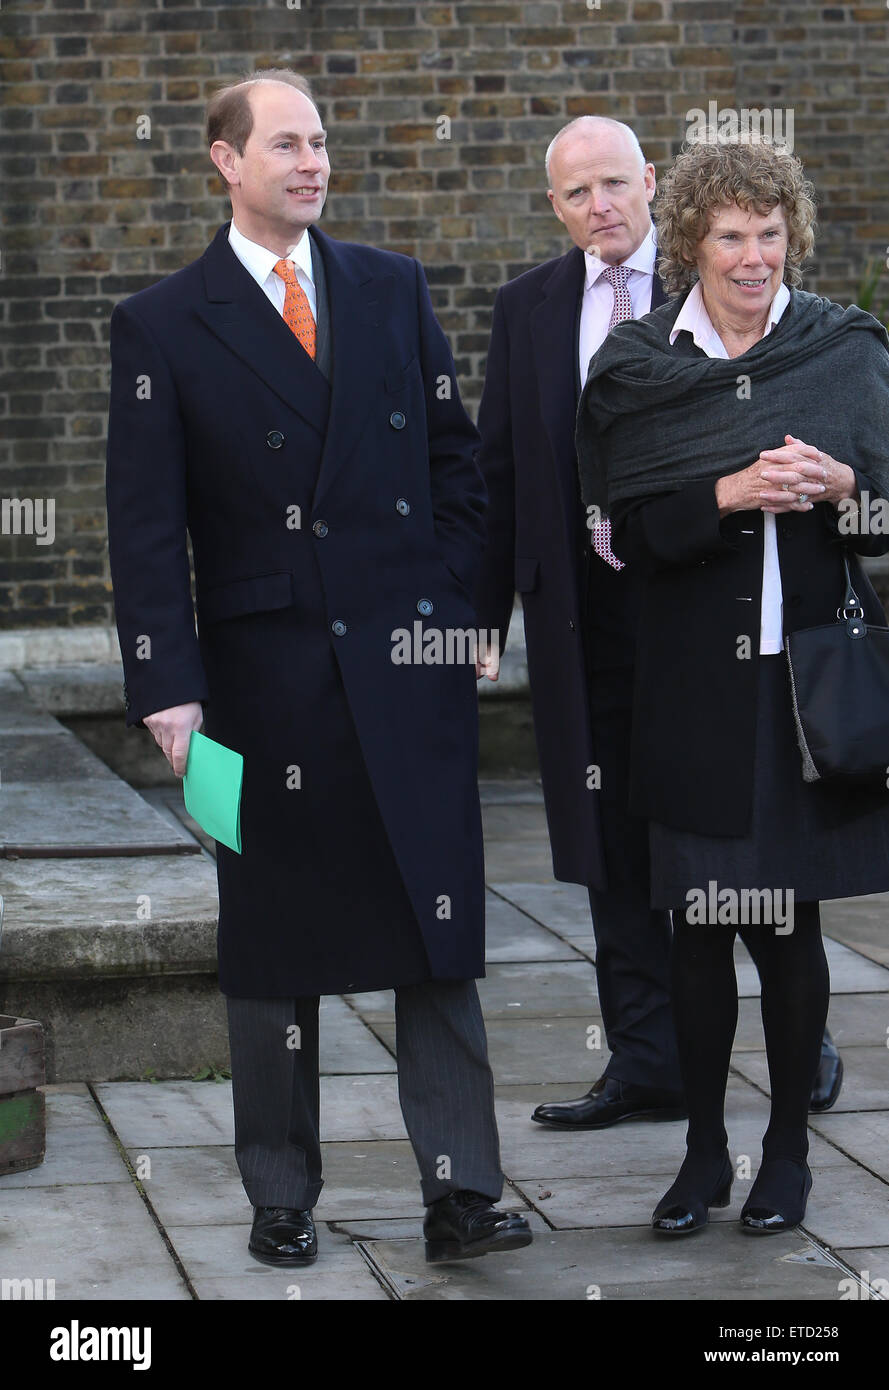 The Earl and Countess of Wessex visit Tomorrow's People Social Enterprise's at St. Anselm'a Church in Kennington on her 50th birthday  Featuring: Prince Edward, Kate Hoey Where: London, United Kingdom When: 20 Jan 2015 Credit: WENN.com Stock Photo